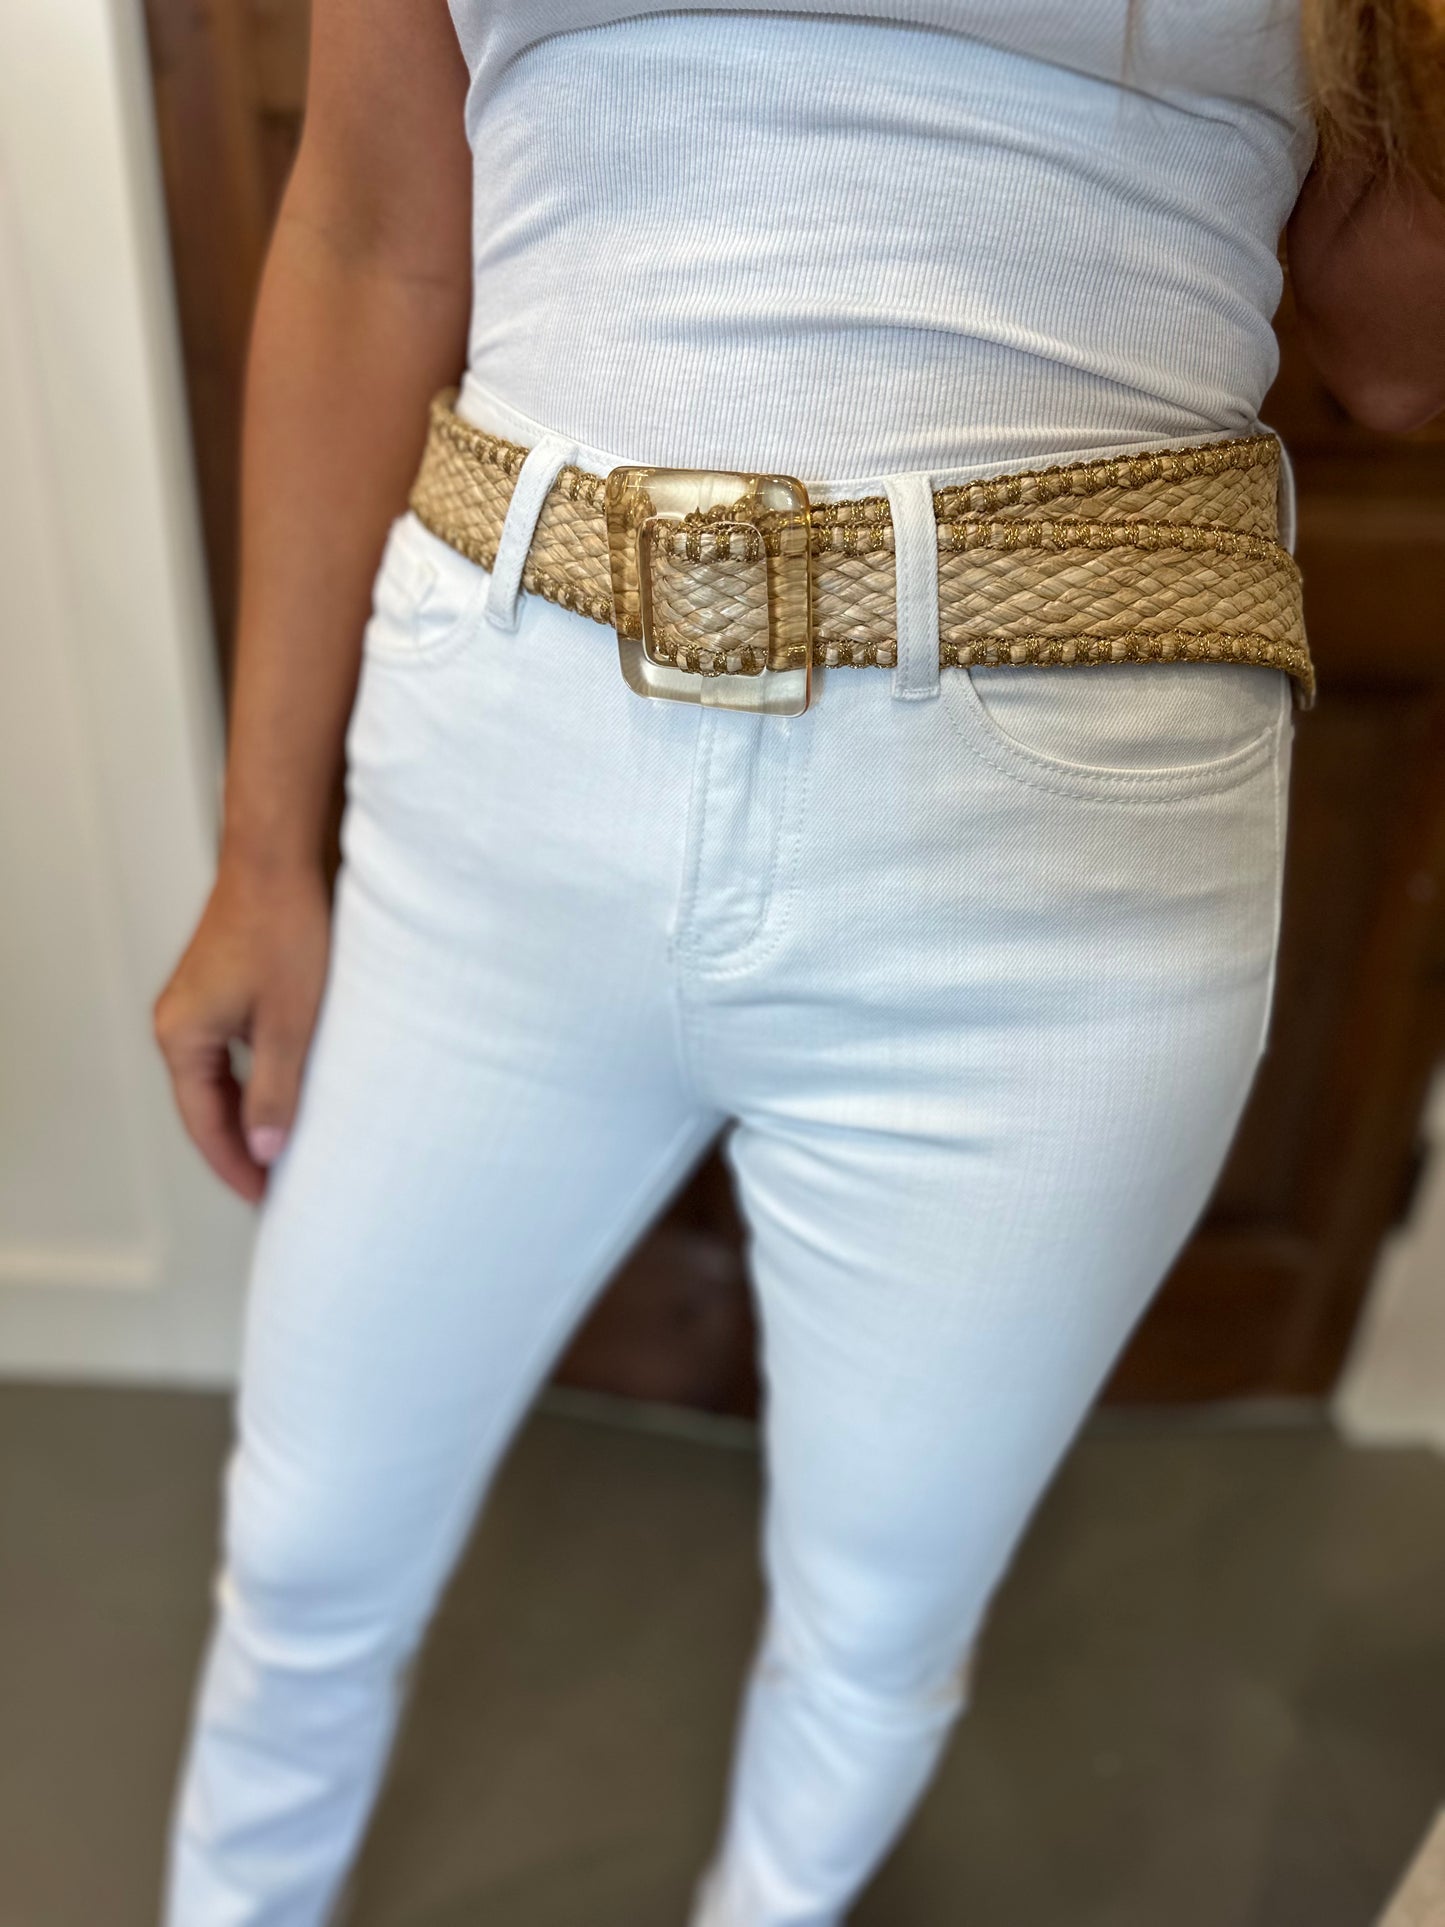 Indy Weave Square Buckle Belt- Ivory